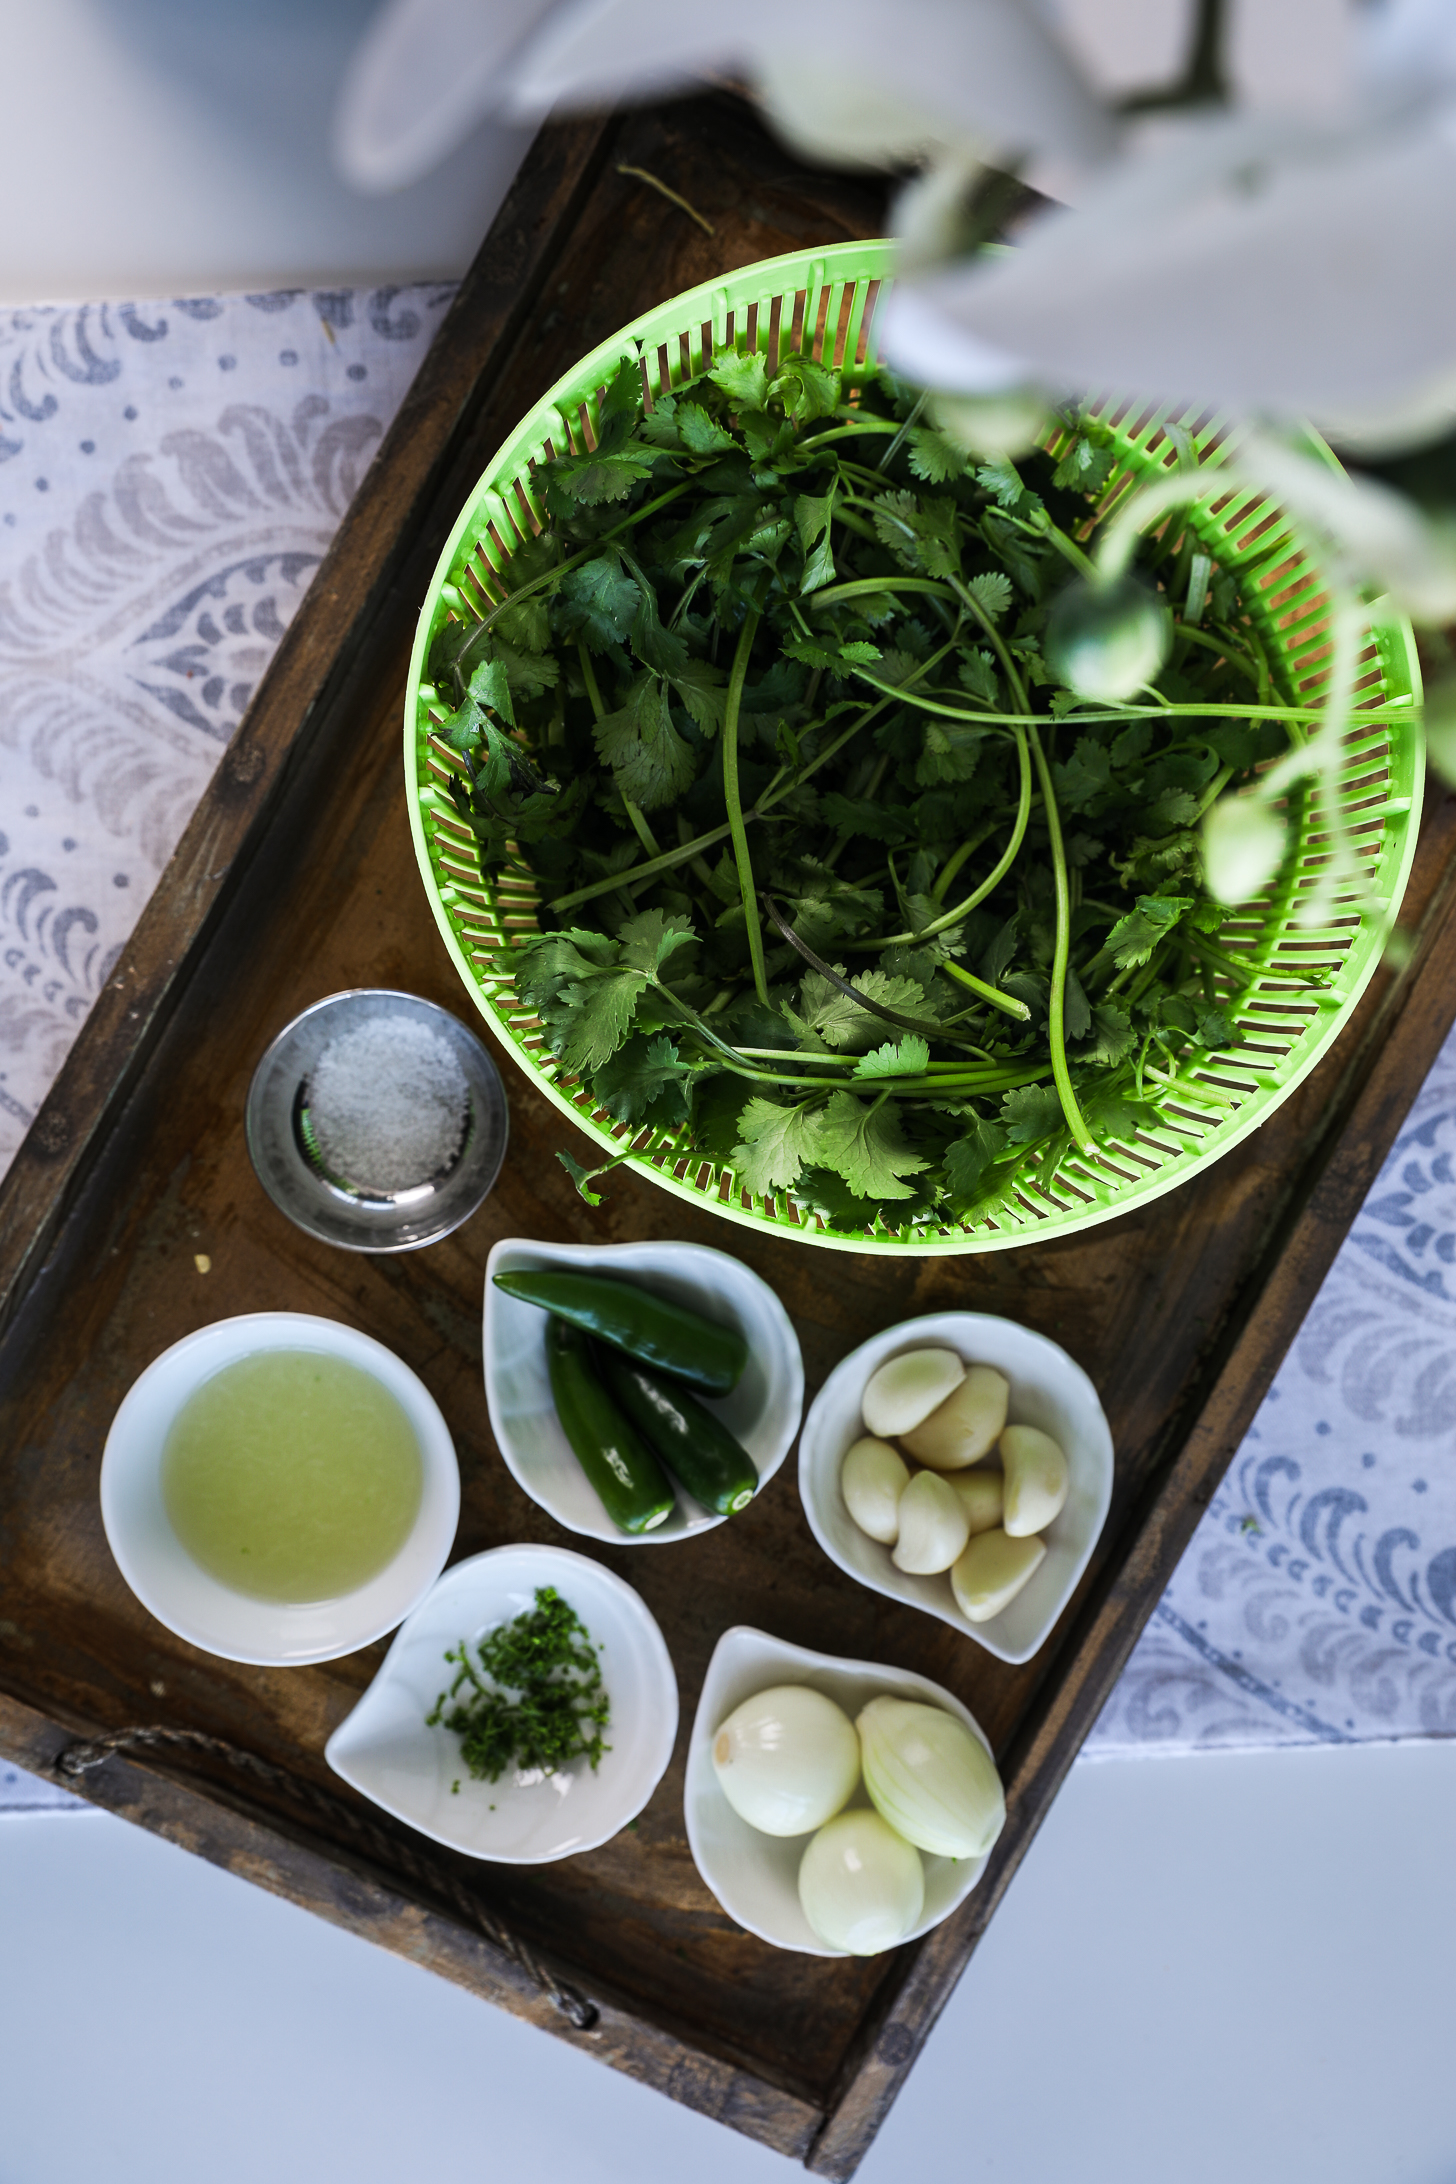 Overhead image of prepared food ingredients including cilantro, chillies, lime juice and zest, shallots and garlic cloves.